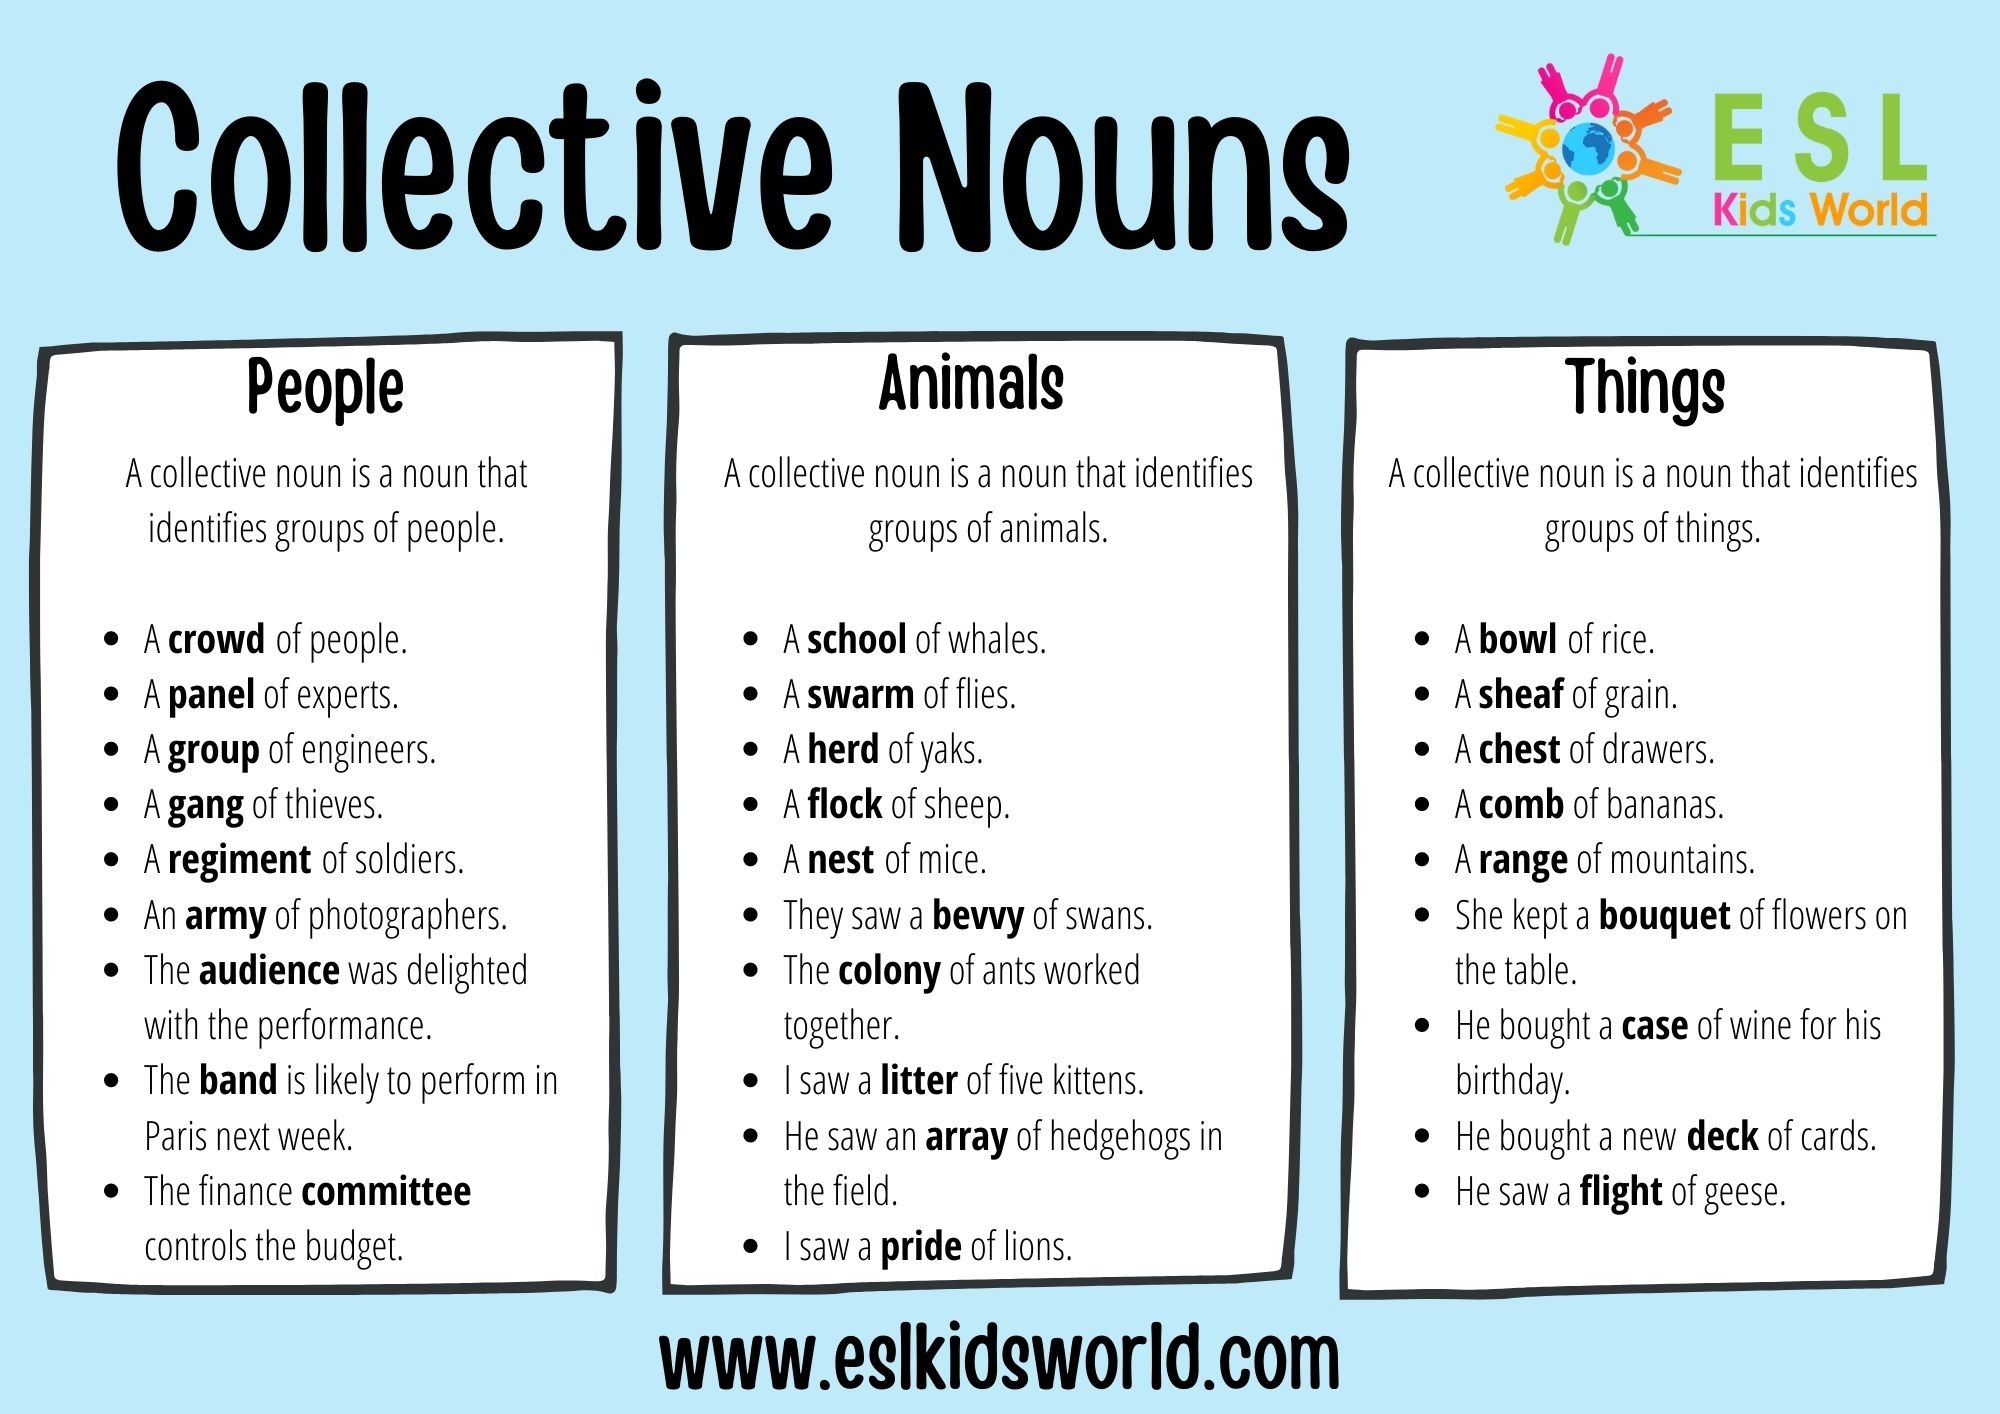 Collective Nouns Examples | What is a Collective Noun? | ESL Kids World